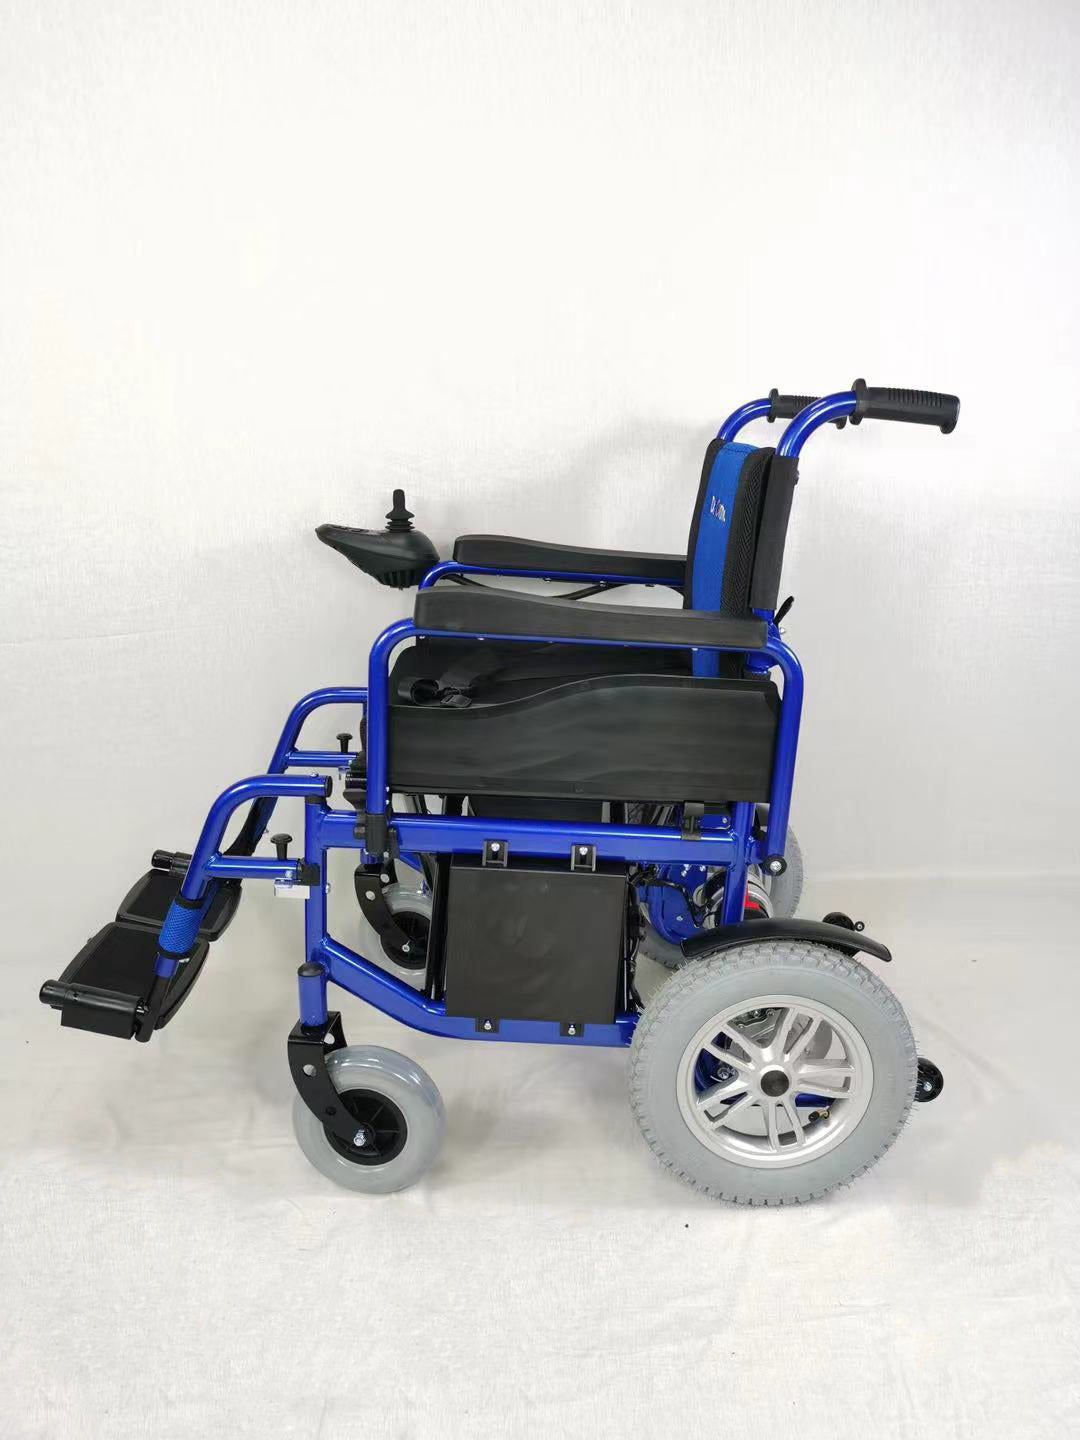 Dr.Ortho DR-A02 Heavy Duty two side batteries Electric Wheelchair, Foldable and Lightweight with 360° Joystick, Weight Capacity 120kg